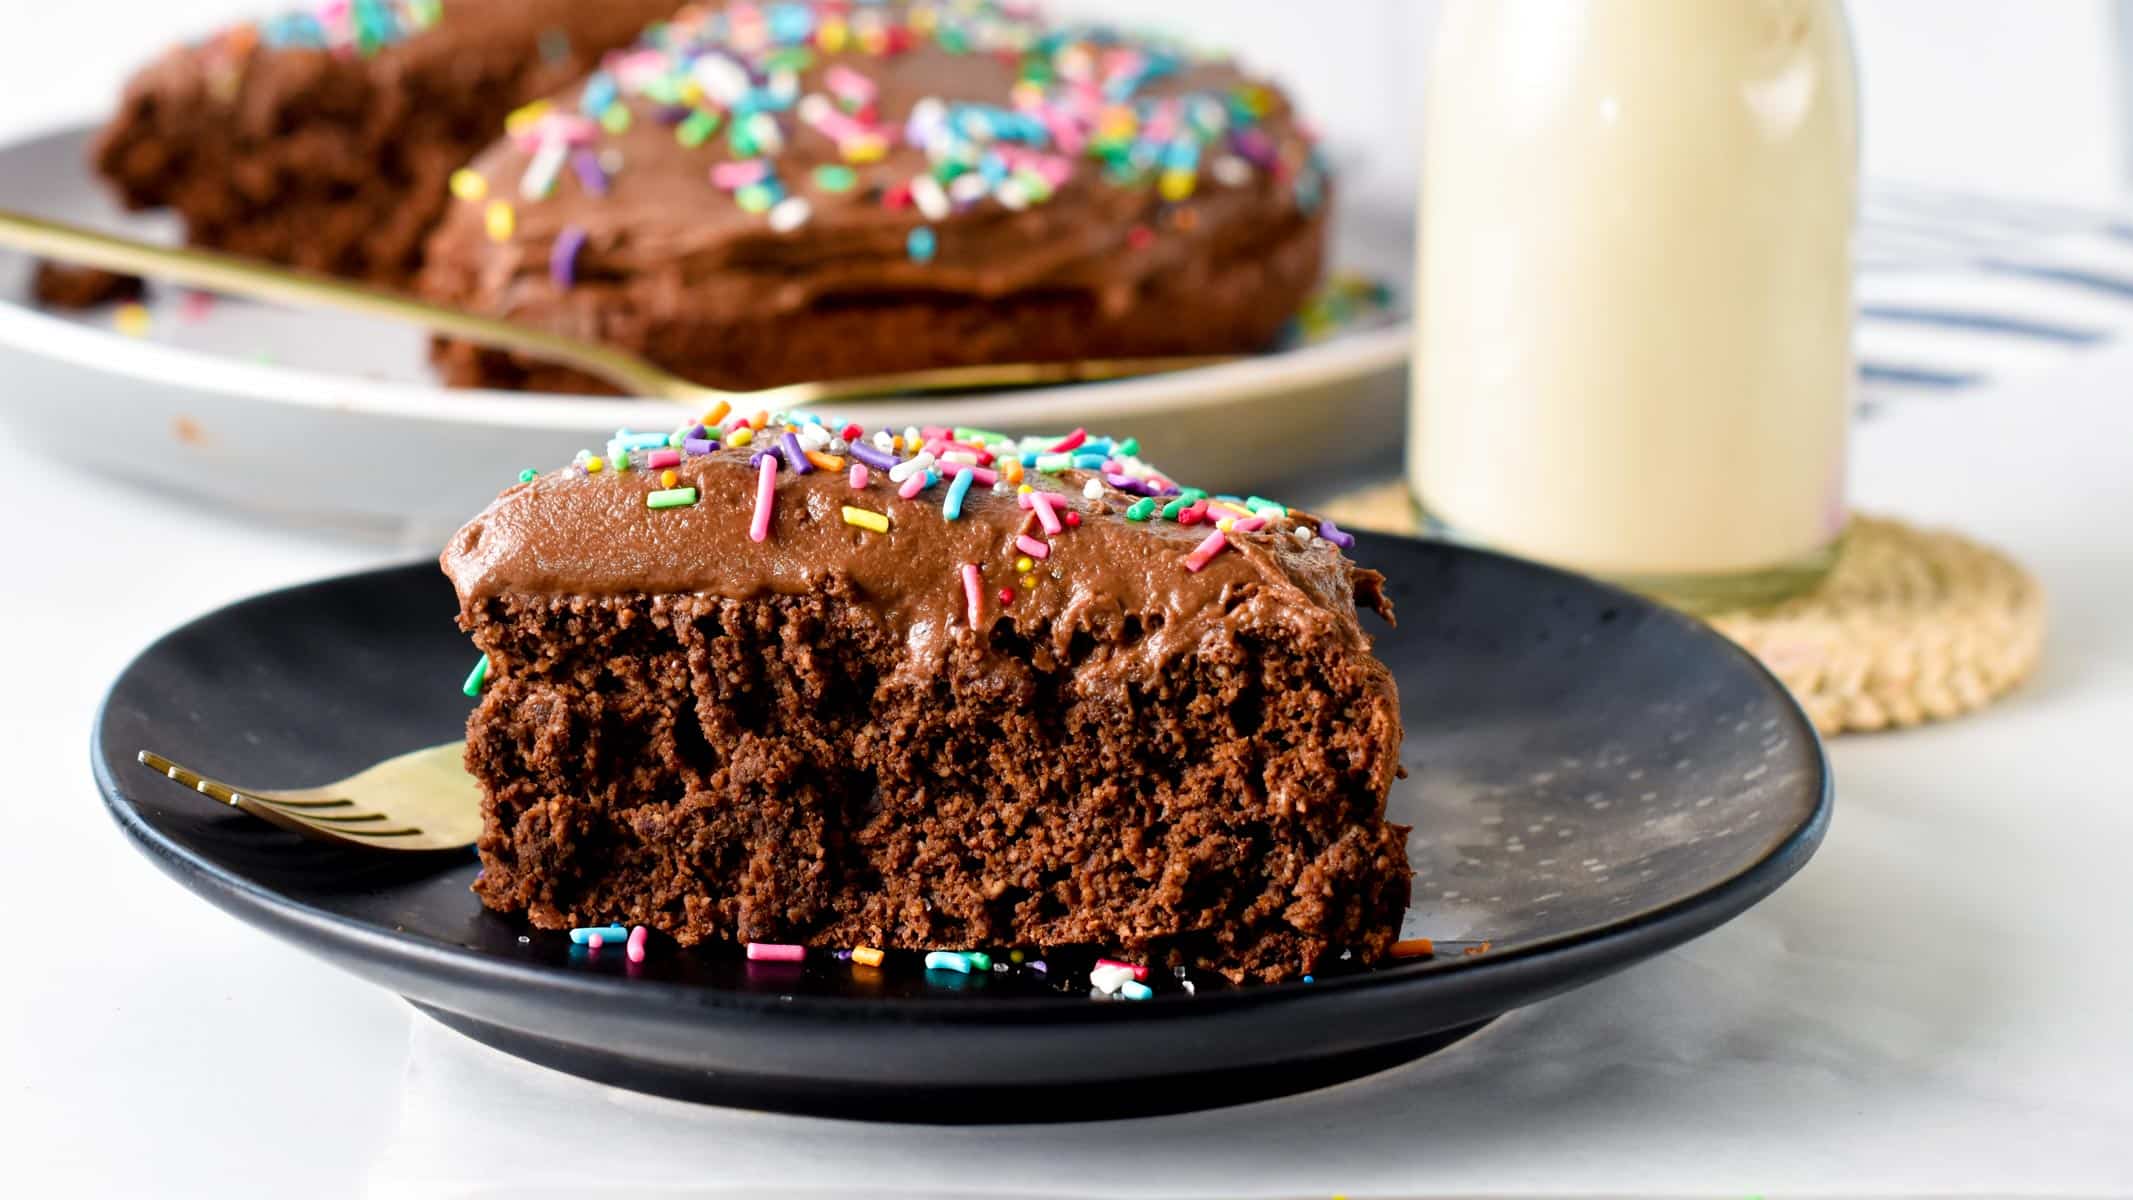 This Protein Cake recipe is a high-protein moist chocolate birthday cake perfect as a healthy celebration cake. It's packed with 15 grams of protein per serving and topped with the best creamy smooth chocolate protein frosting.